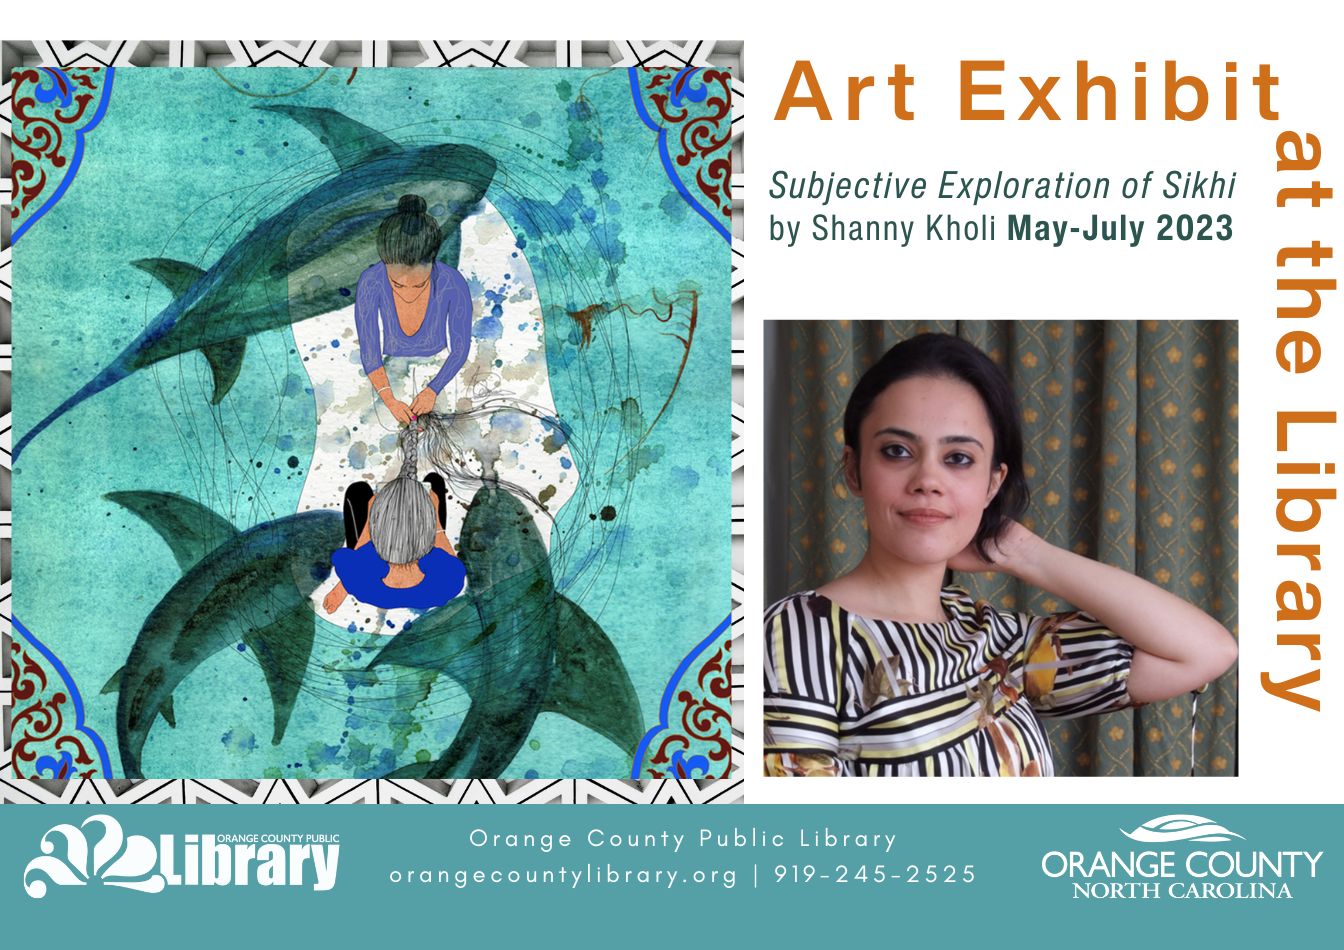 Art Exhibit: Subjective Exploration of Sikhi by Shanny Kohli at the main library in Hillsborough, NC through the end of July.